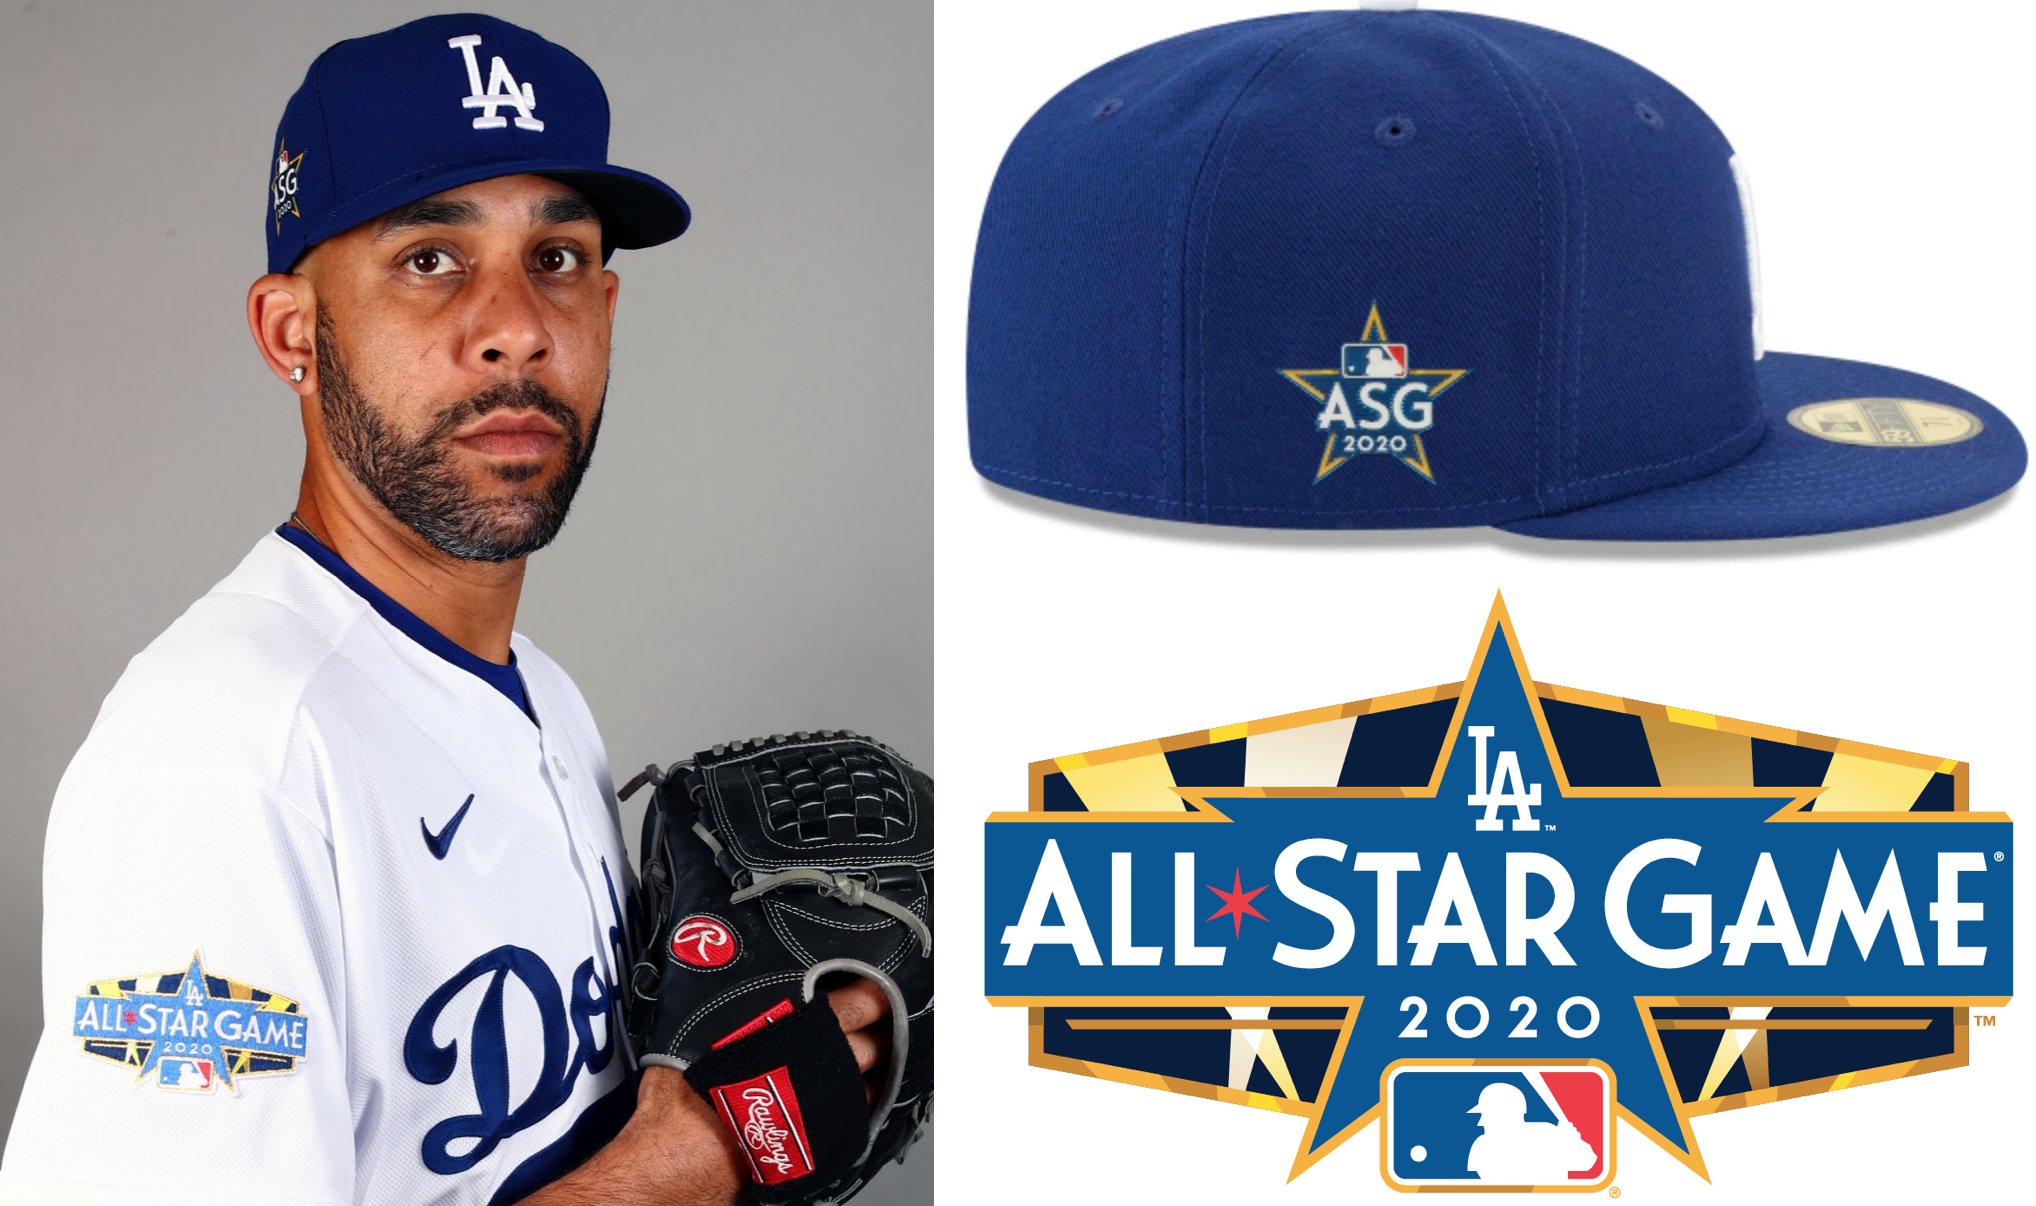 Paul Lukas on X: Good look at the All-Star Game patches that this year's  hosts, the Dodgers, are wearing on their caps and jersey sleeves. Let's  hope the game actually takes place.